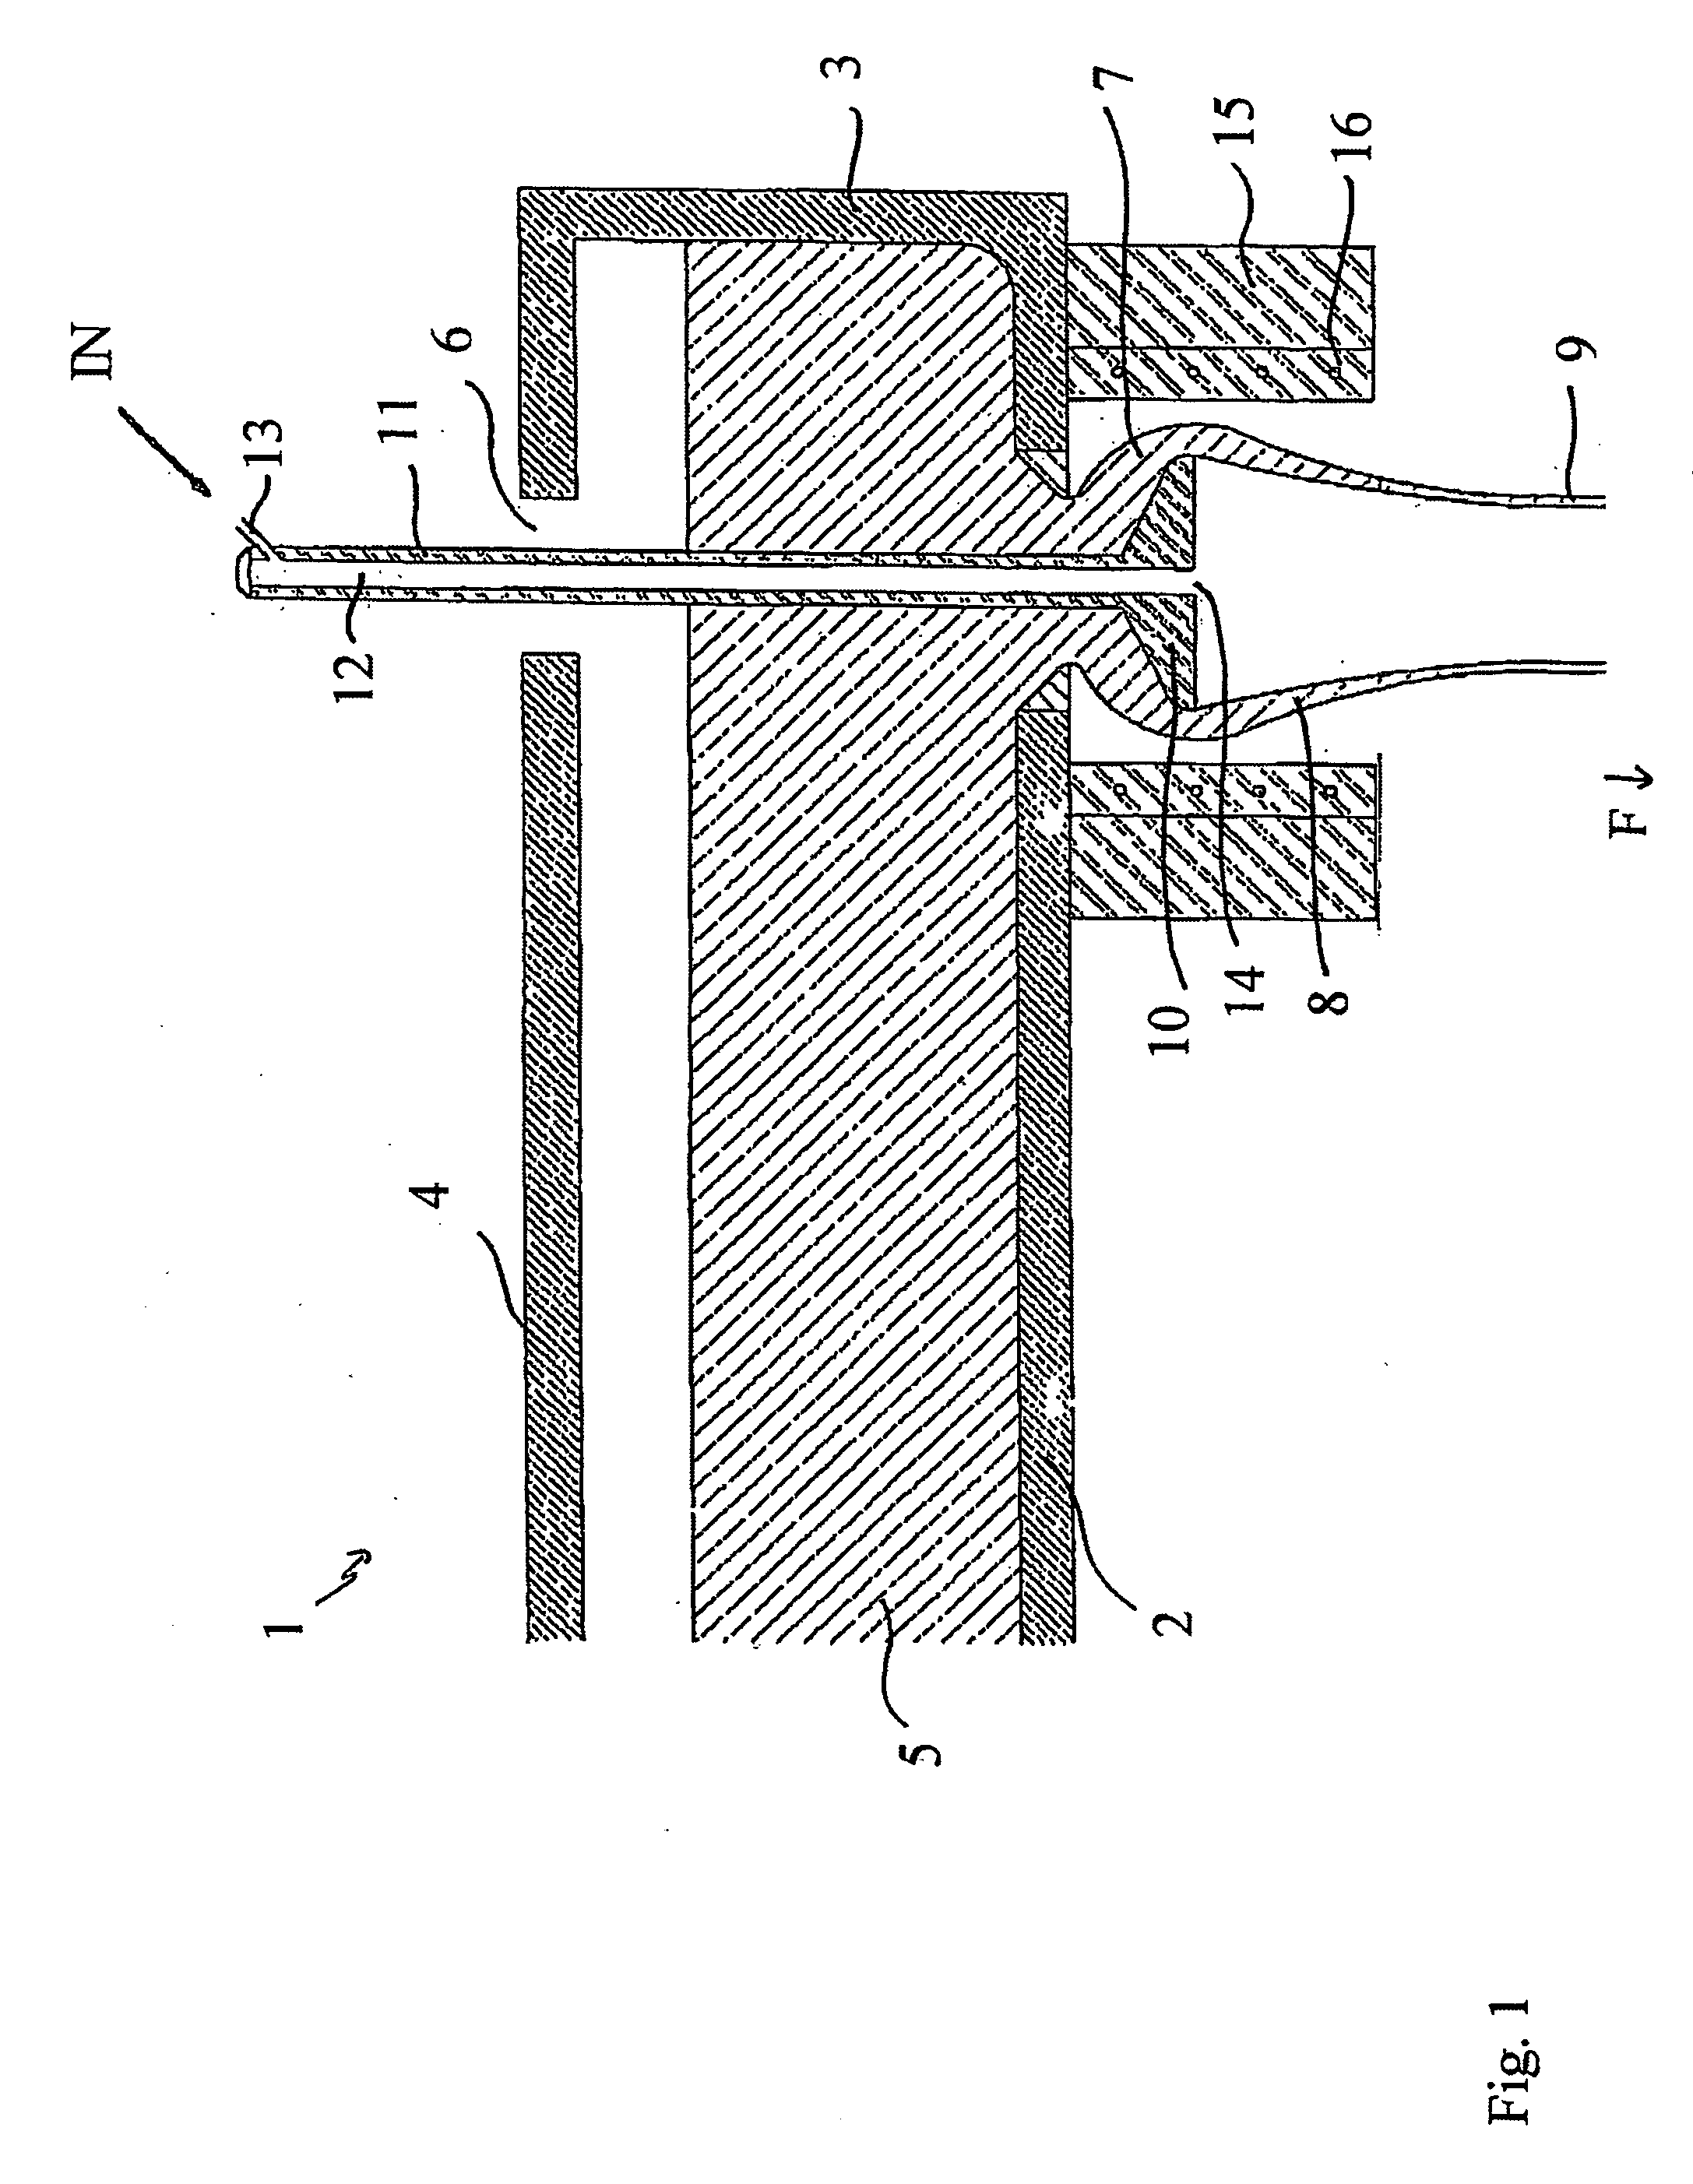 Method and apparatus for manufacturing internally coated glass tubes